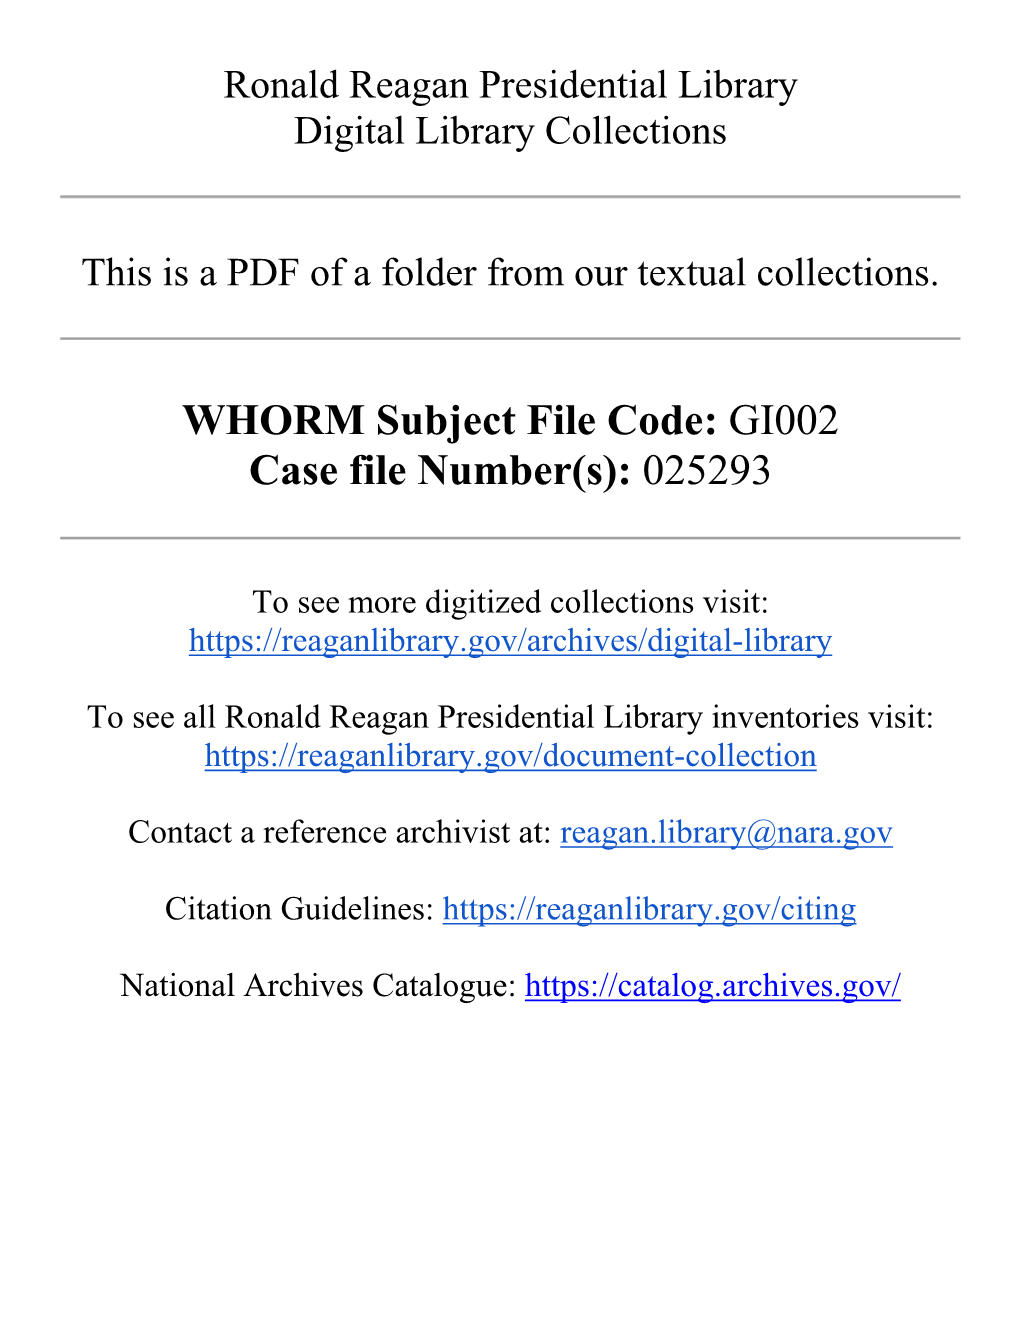 WHORM Subject File Code: GI002 Case File Number(S): 025293